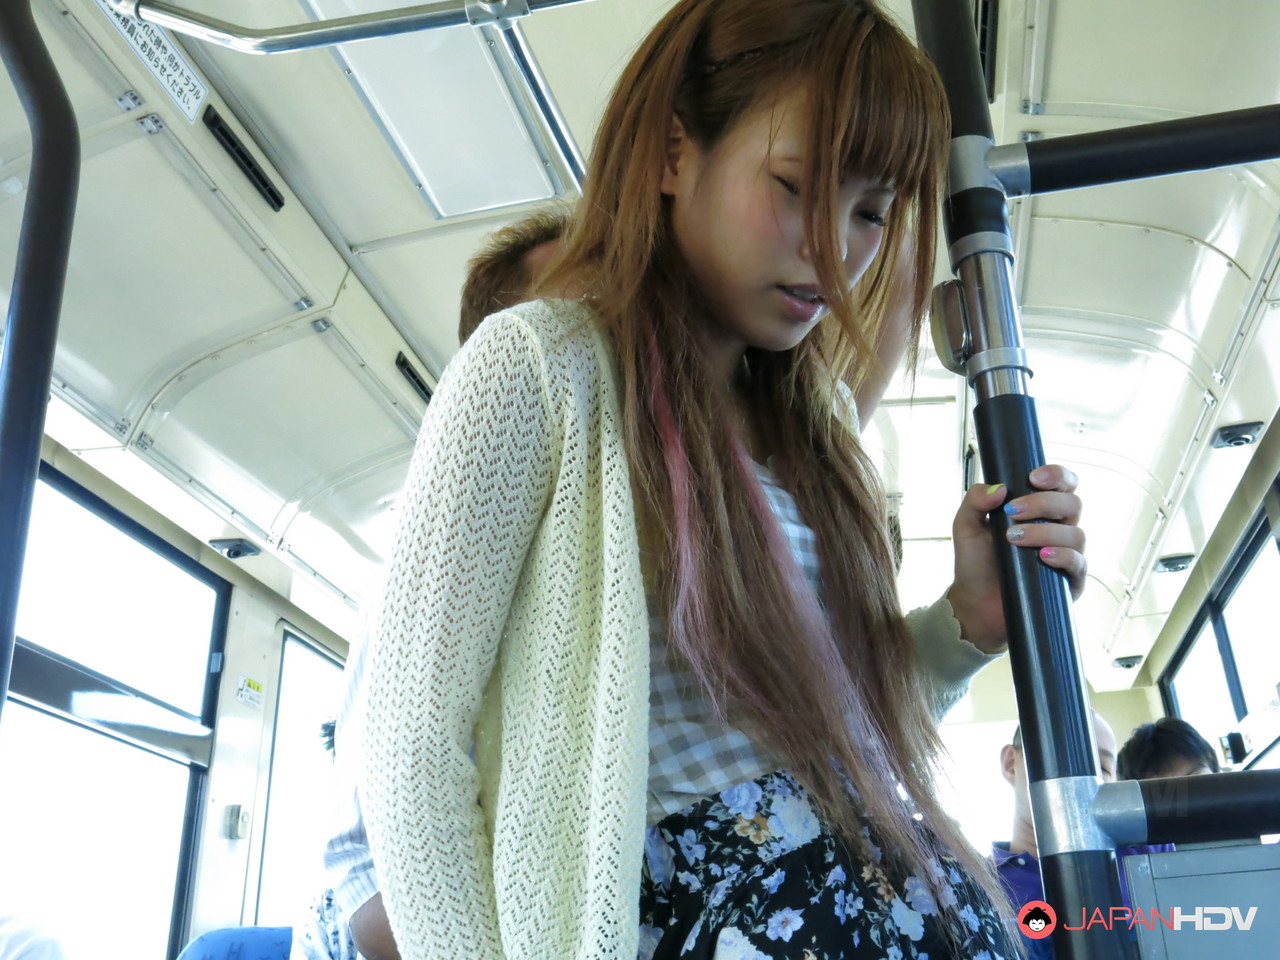 Japanese teen Marin Yuuki gets fucked by a bunch of passengers on the bus foto pornográfica #424345720 | Japan HDV Pics, Marin Yuuki, Gangbang, pornografia móvel